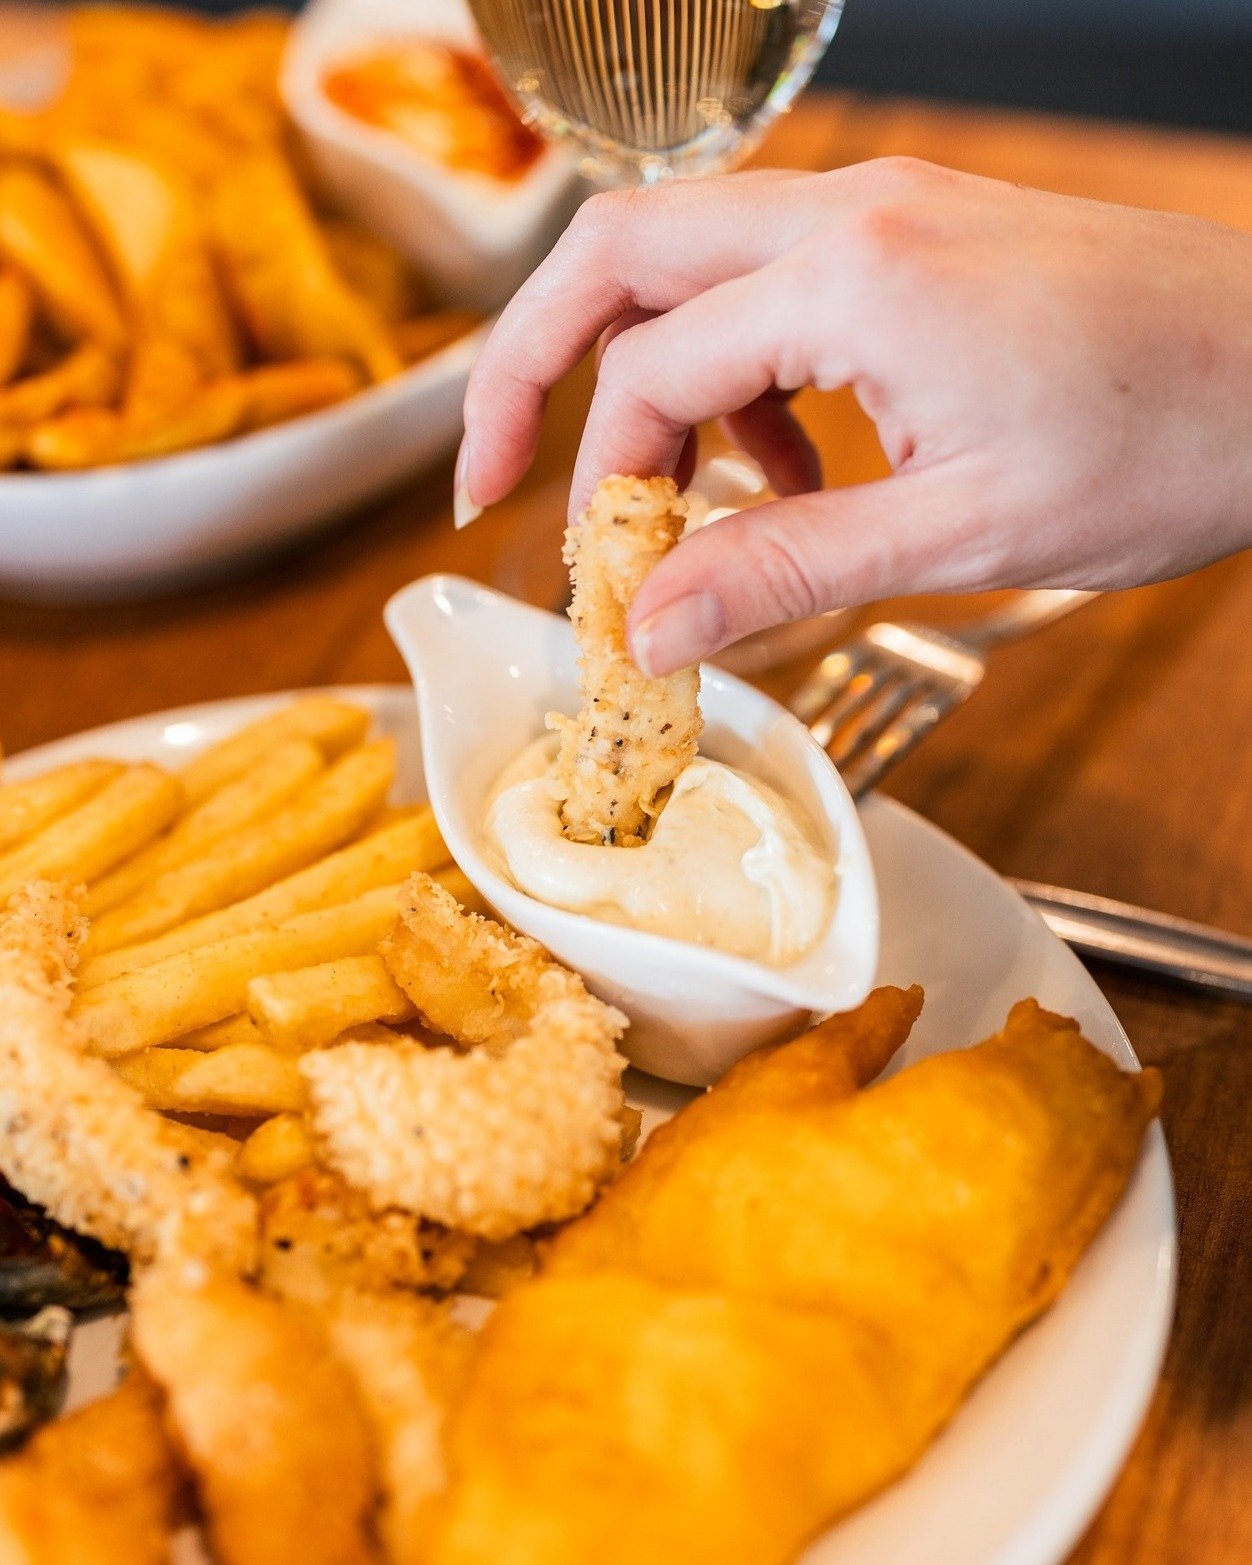 Start the weekend early with us! 🥳

For all you seafood lovers, get your hands on our Seafood Basket 🐟🍤🍟

Book here 👉 www.midwaytavern.net